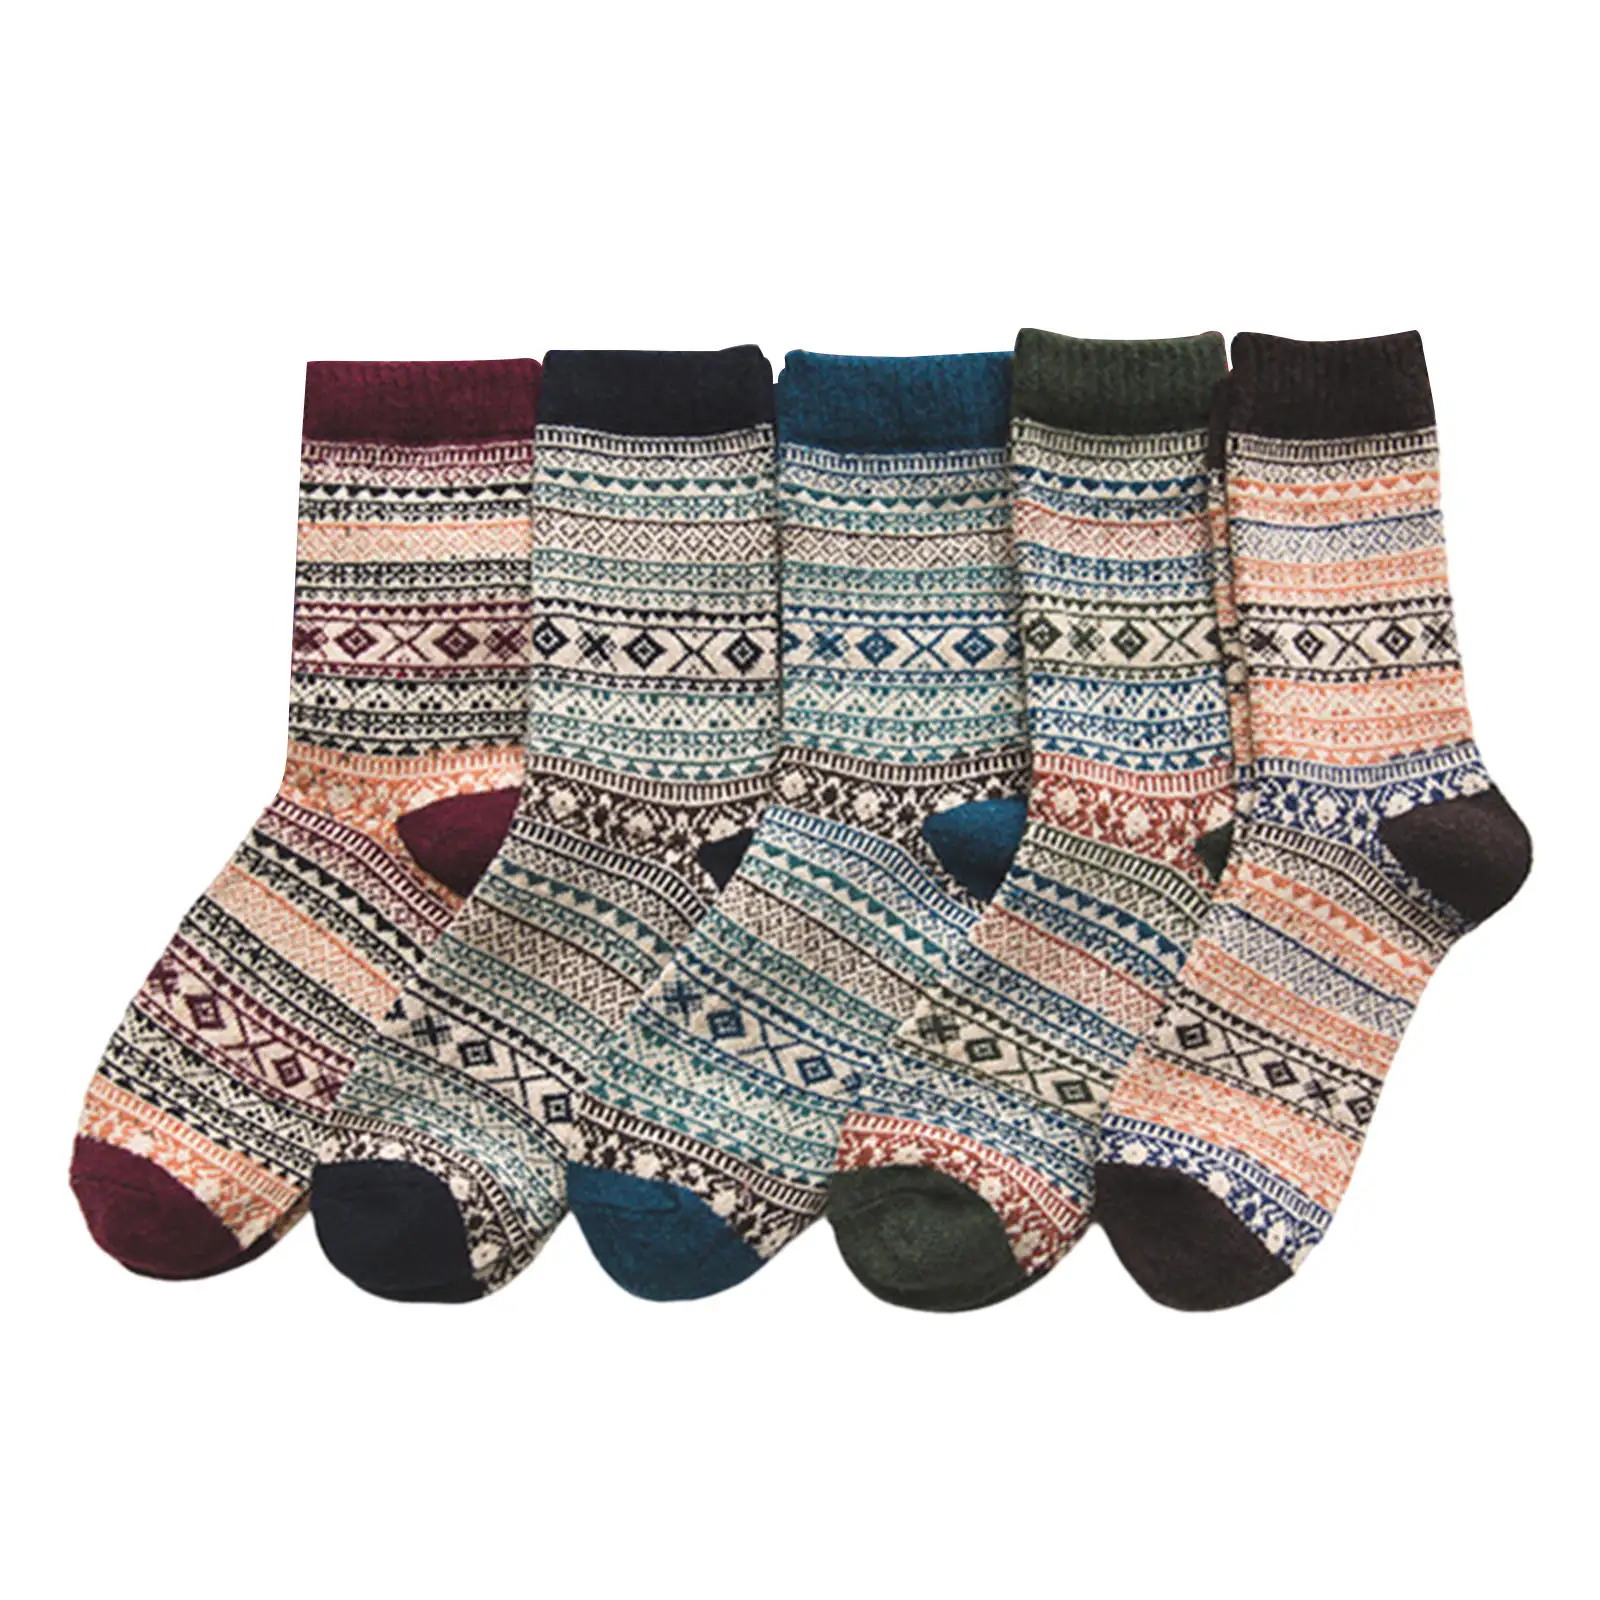 5 Pairs Vintage Style Mens Socks Thick Winter Warm Wool Comfy One Size for Men Camping